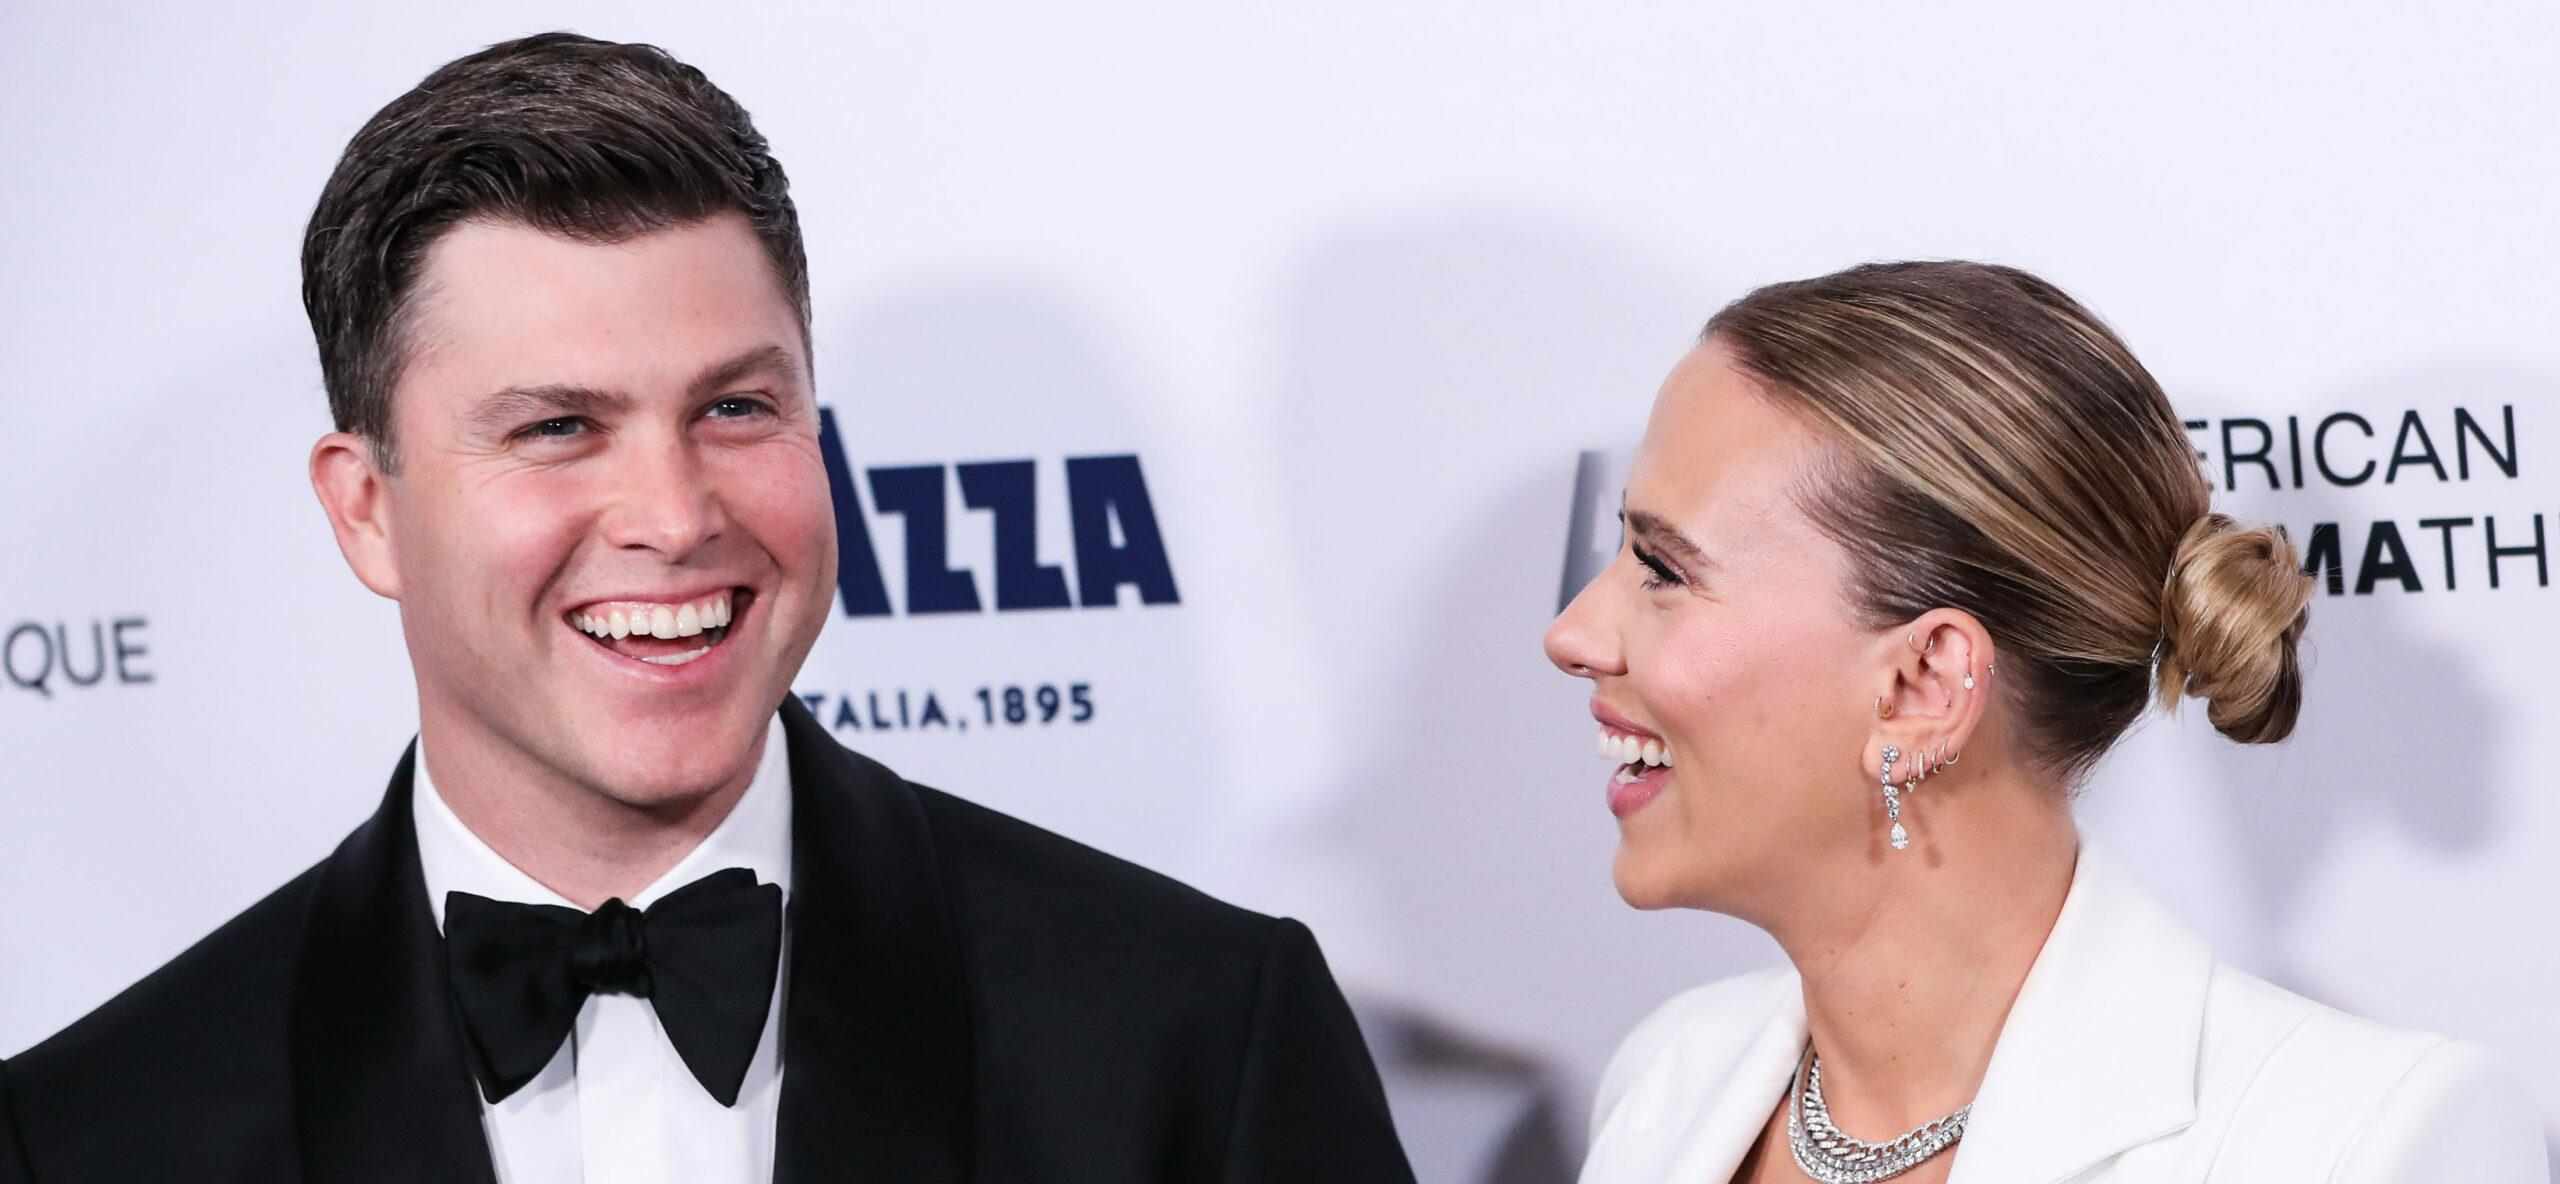 BEVERLY HILLS, LOS ANGELES, CALIFORNIA, USA - NOVEMBER 18: 35th Annual American Cinematheque Awards Honoring Scarlett Johansson held at The Beverly Hilton Hotel on November 18, 2021 in Beverly Hills, Los Angeles, California, United States. 18 Nov 2021 Pictured: Colin Jost, Scarlett Johansson.